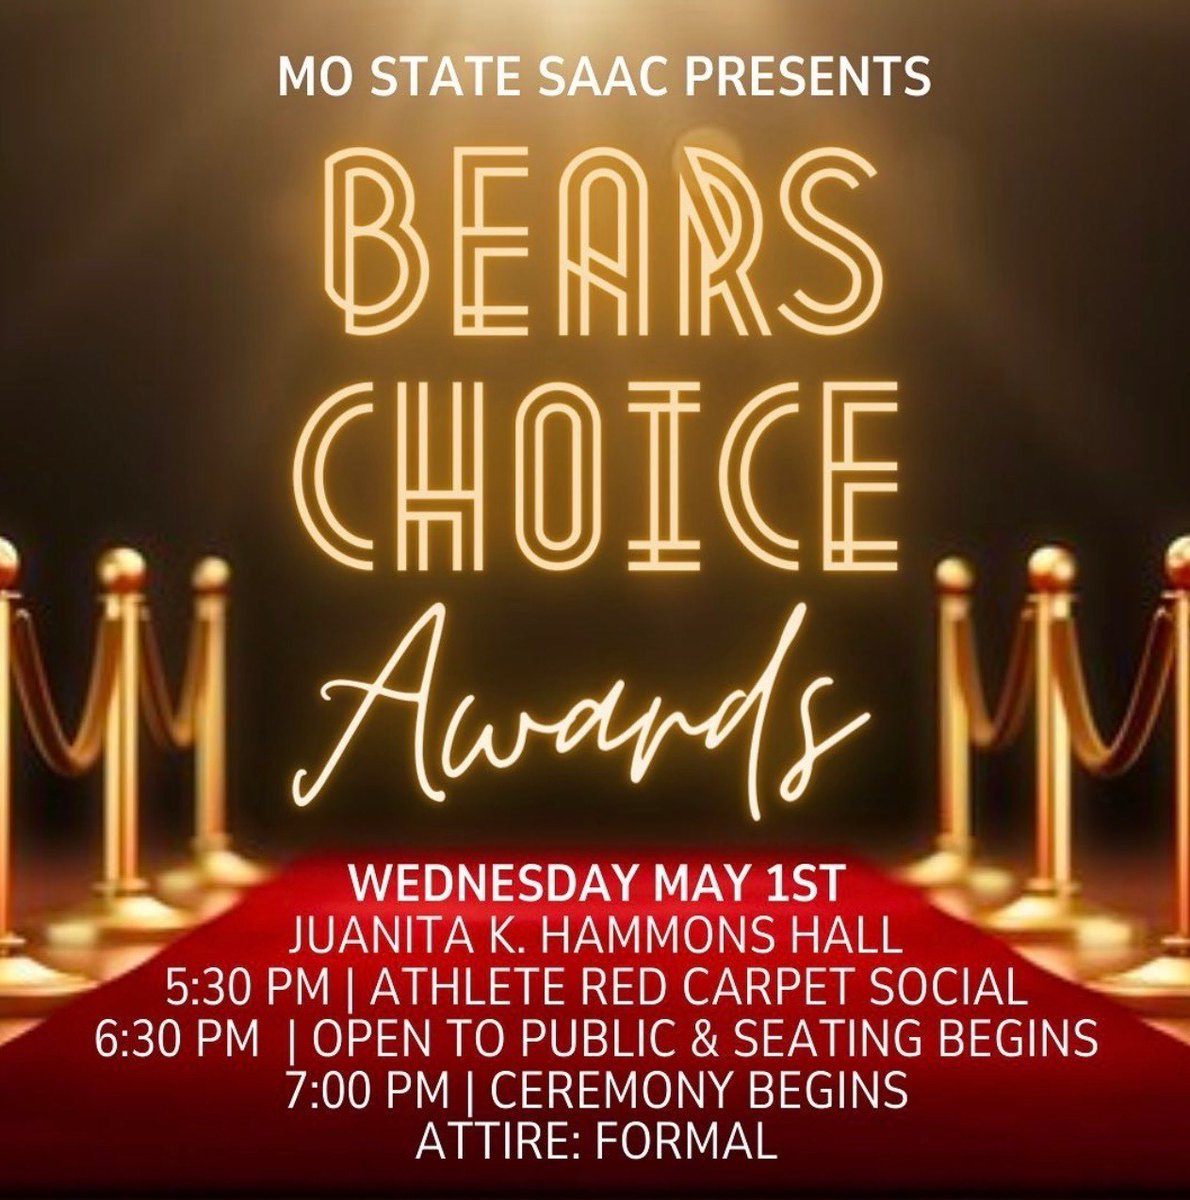 The 2024 Bears Choice Awards presented by @SAACMOState take place this Wednesday, May 1st! Stay tuned over the next few days as we highlight some of this year's nominees! #BearsChoiceAwards